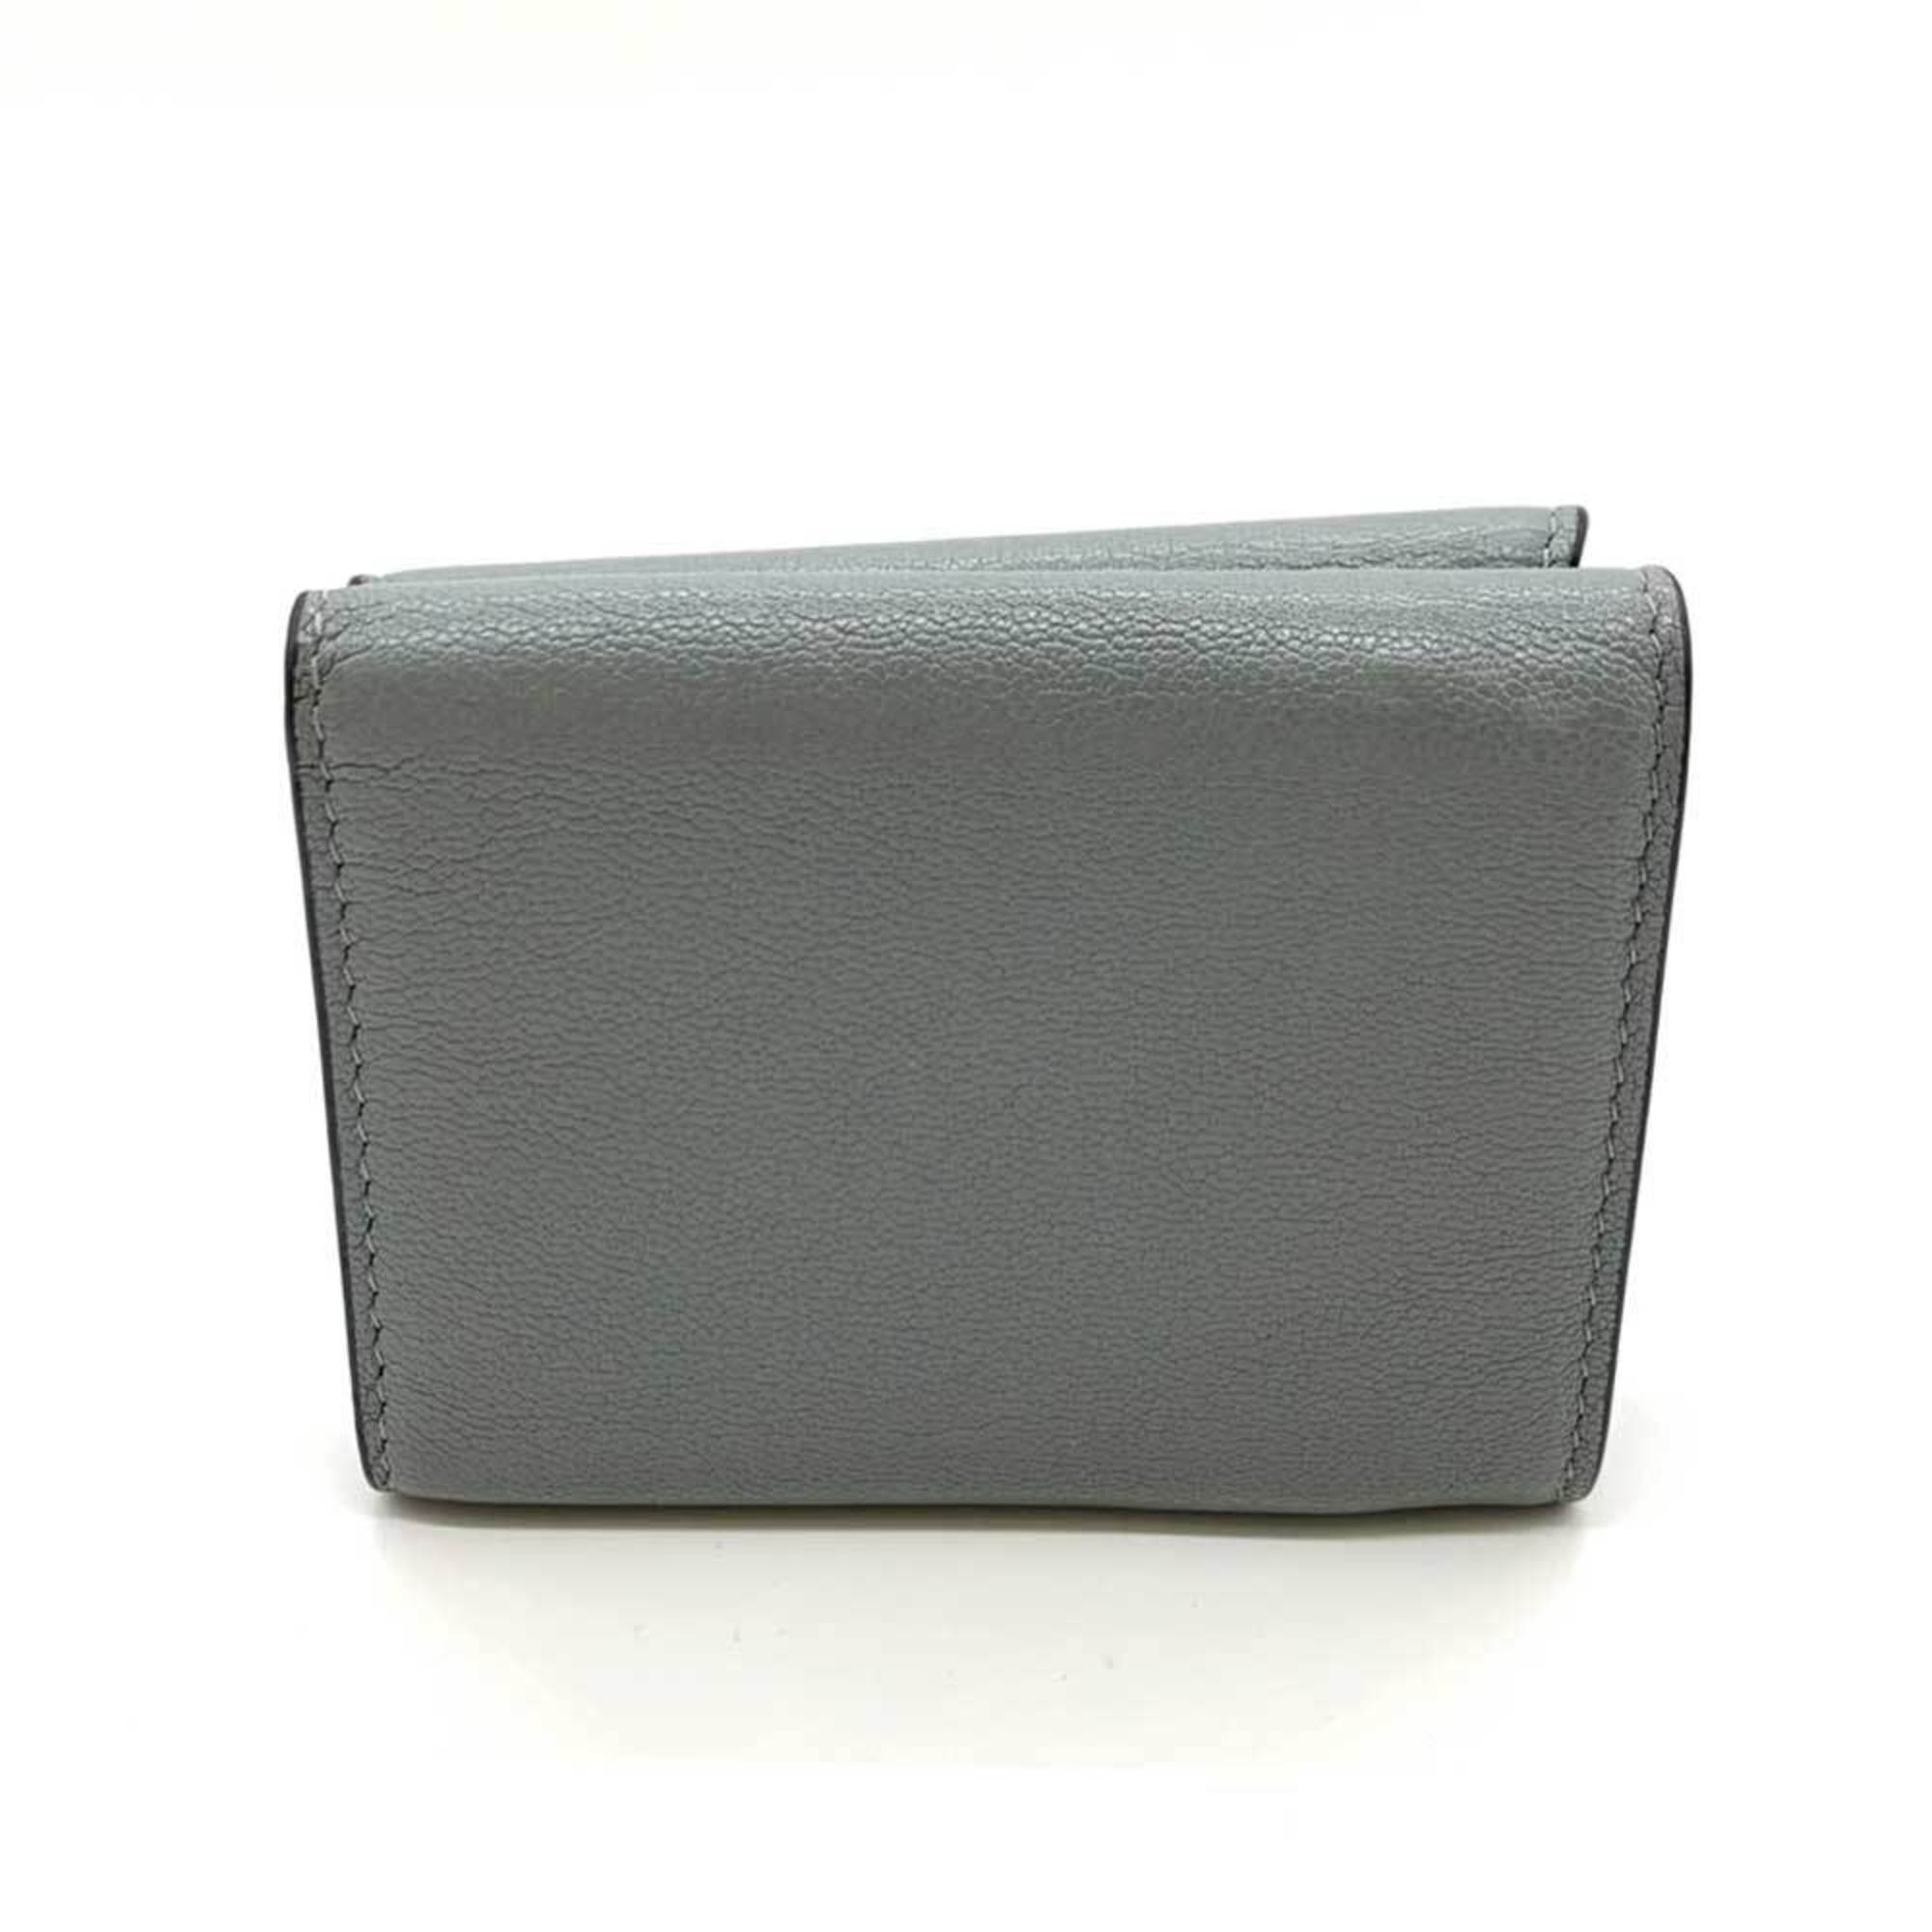 Christian Dior Wallet Saddle Gray Trifold W Small Flap D Motif Women's Leather S5653CBAA ChristianDior